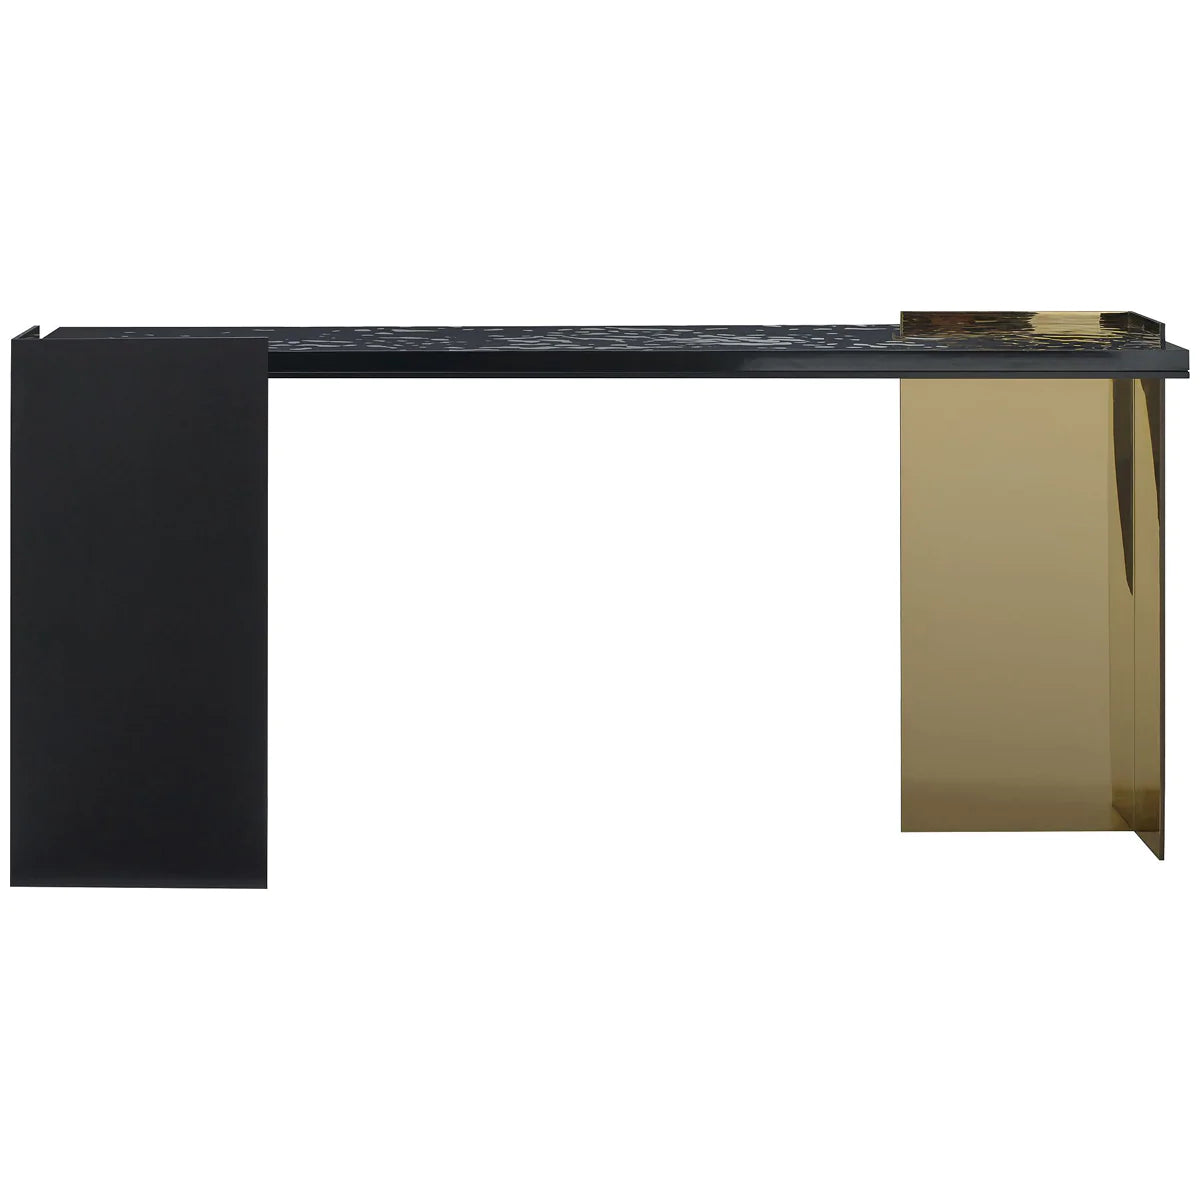 Baker Furniture Wrap Console Table MR7065, Lacquer